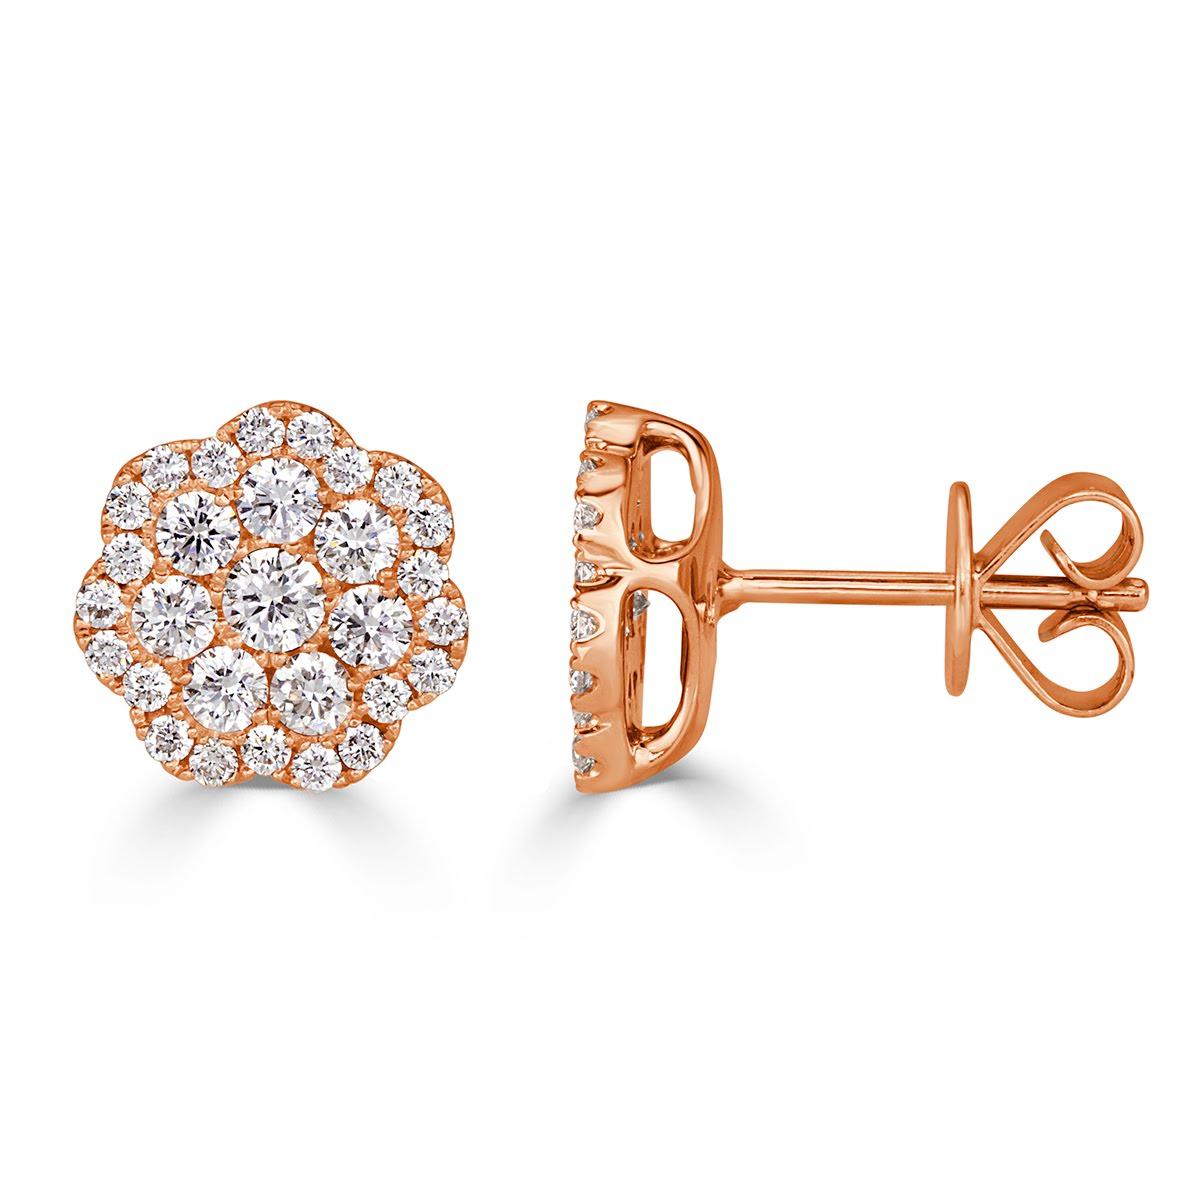 Custom created in 14k rose gold, this exquisite pair of diamond stud earrings features 1.03ct of impeccably matched round brilliant cut diamonds set in a lovely floral pattern. The diamonds are graded at E-F in color and VS1-VS2 in clarity. This